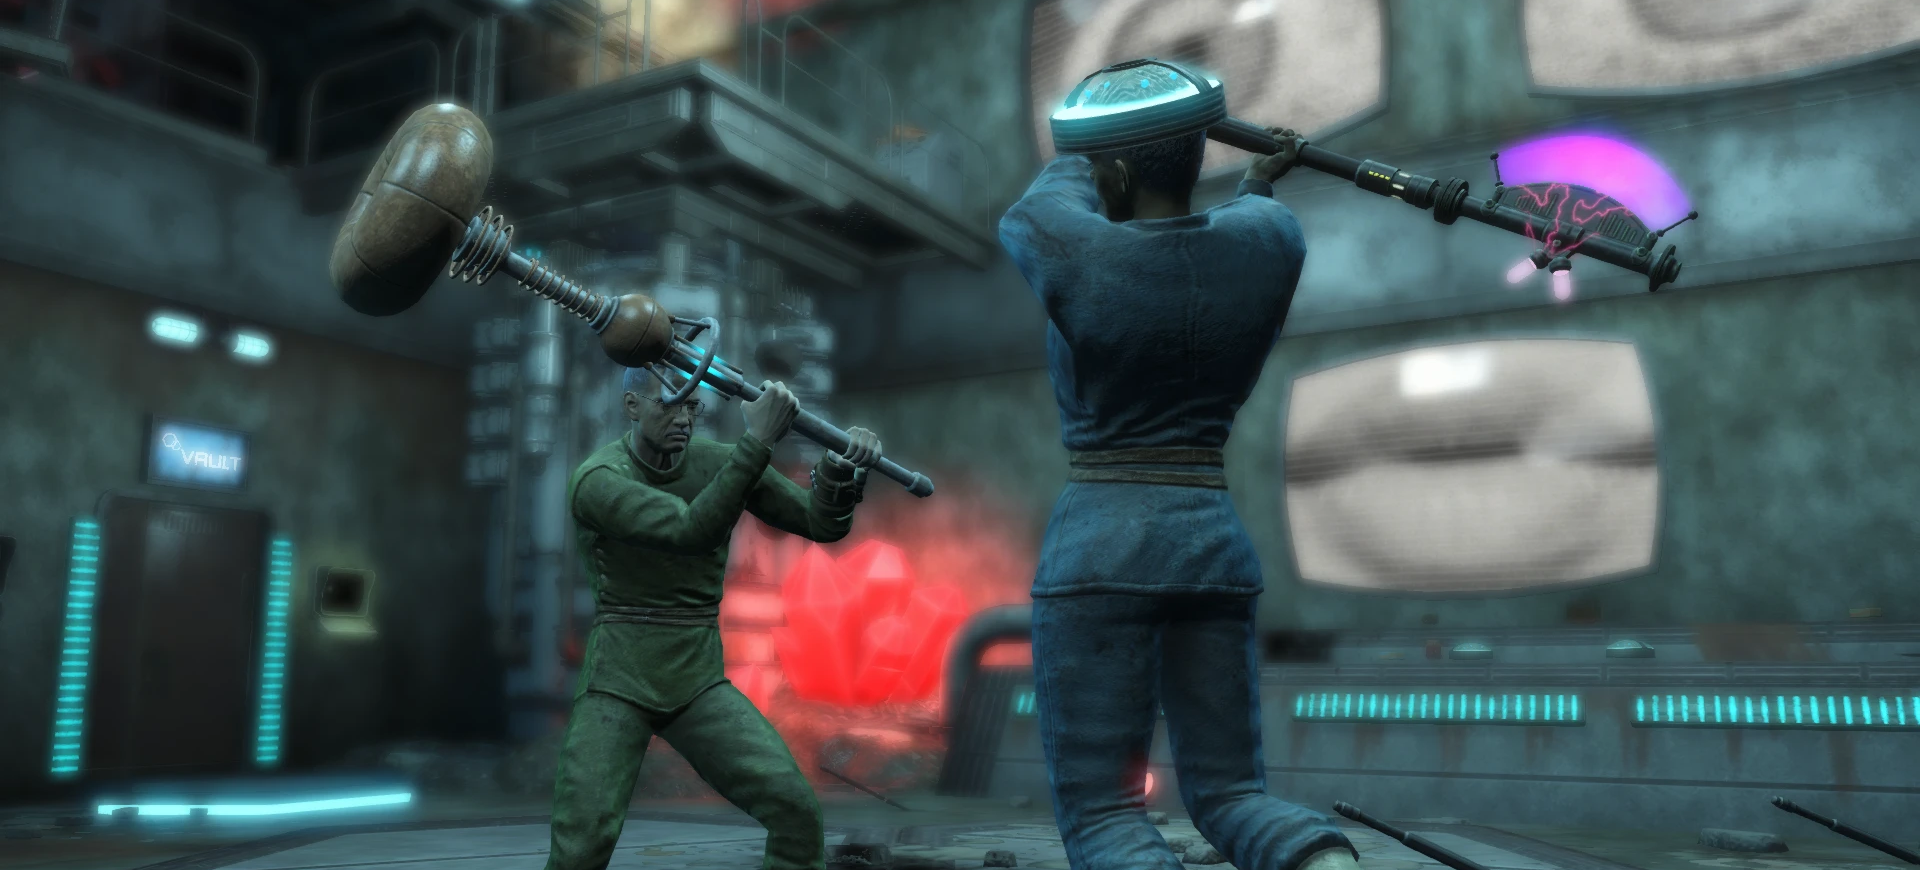 Capital Wasteland looks a lot like Fallout 3 in Fallout 4